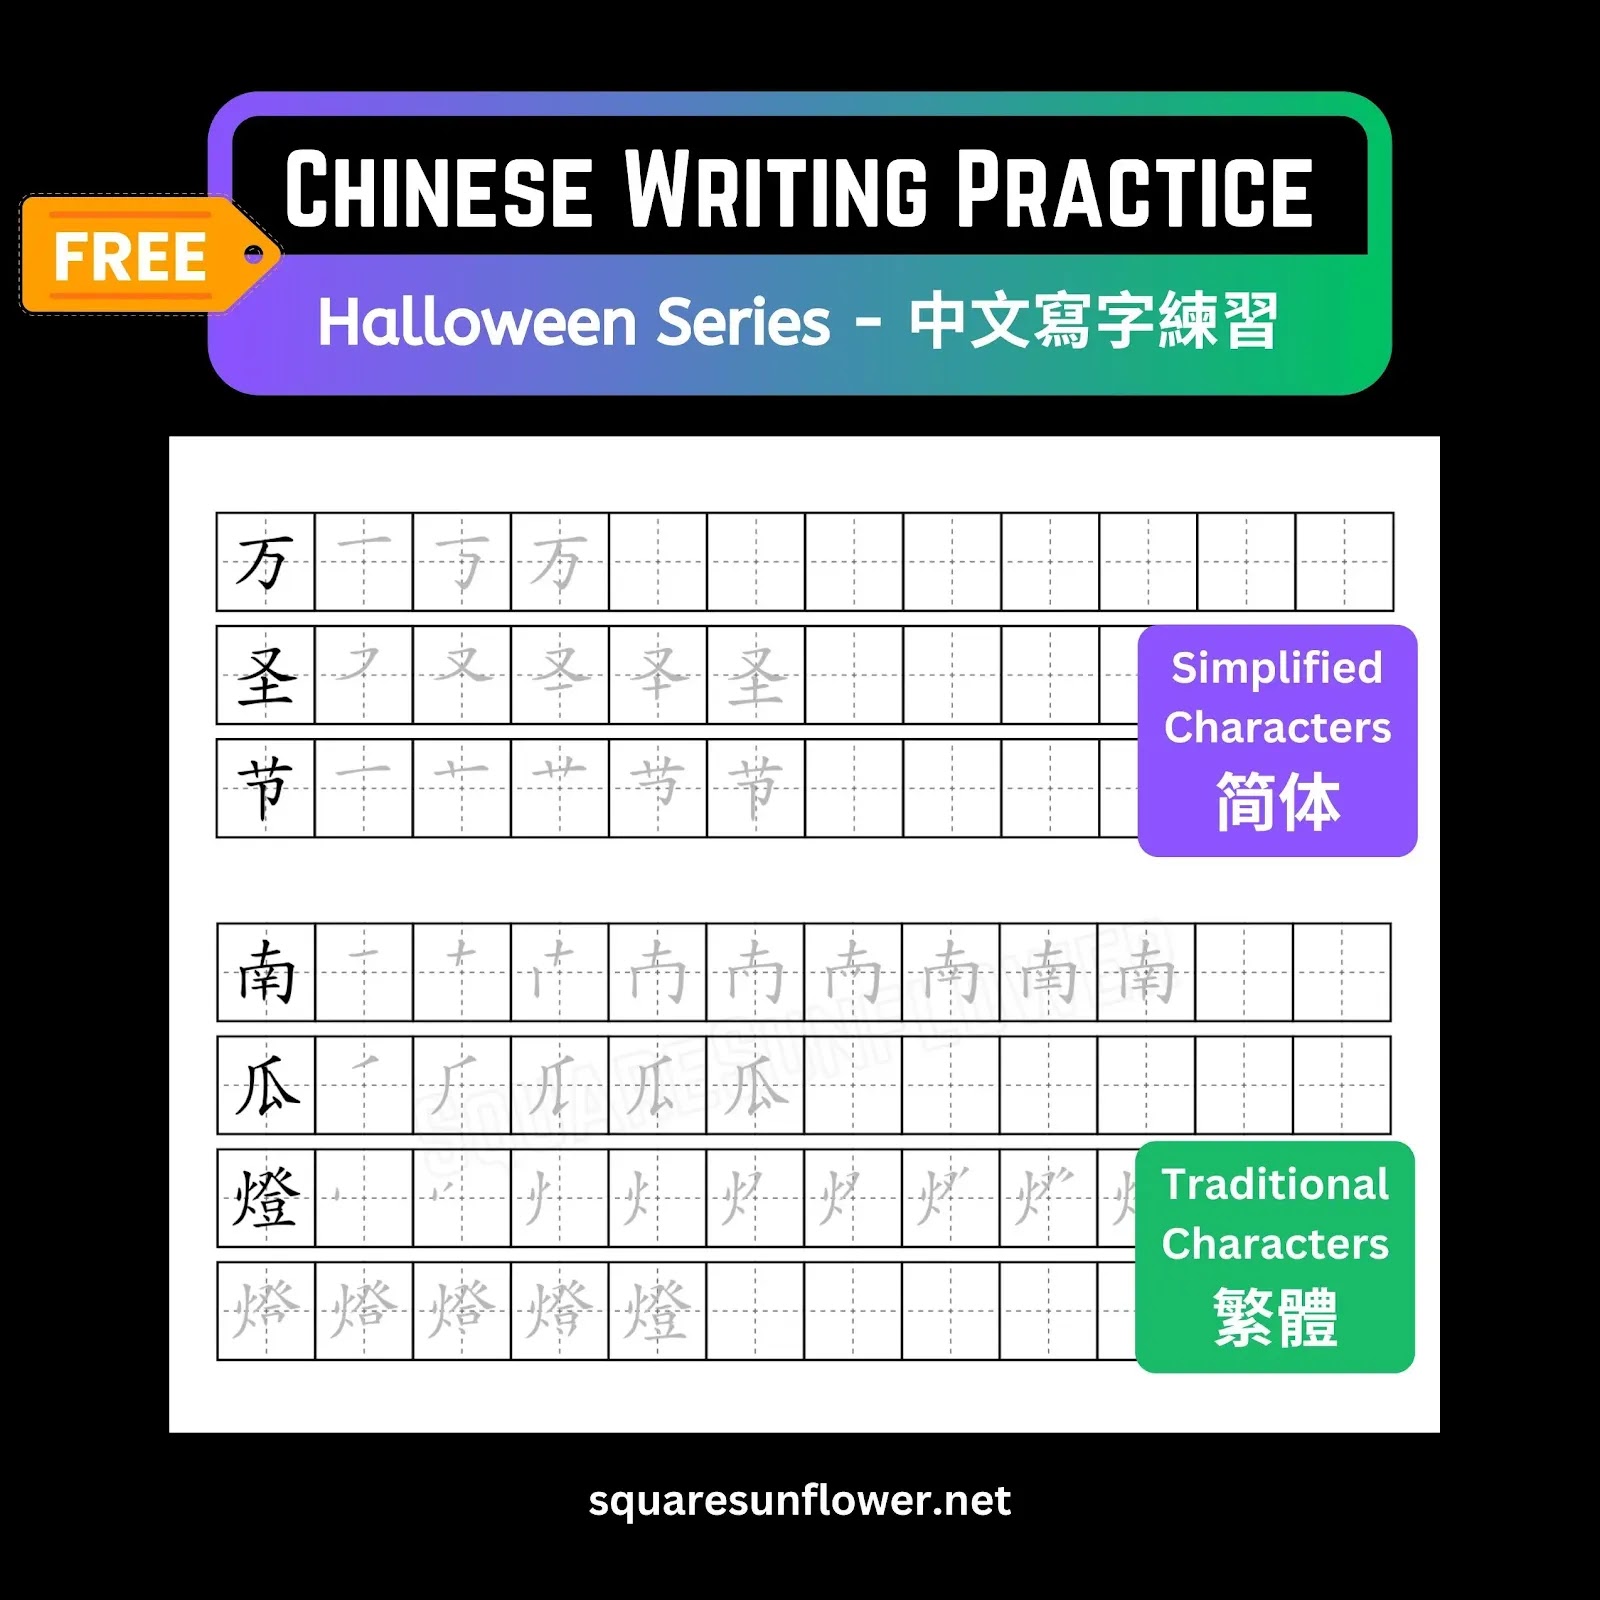 Learn to write Halloween words printable Chinese writing practice sheets